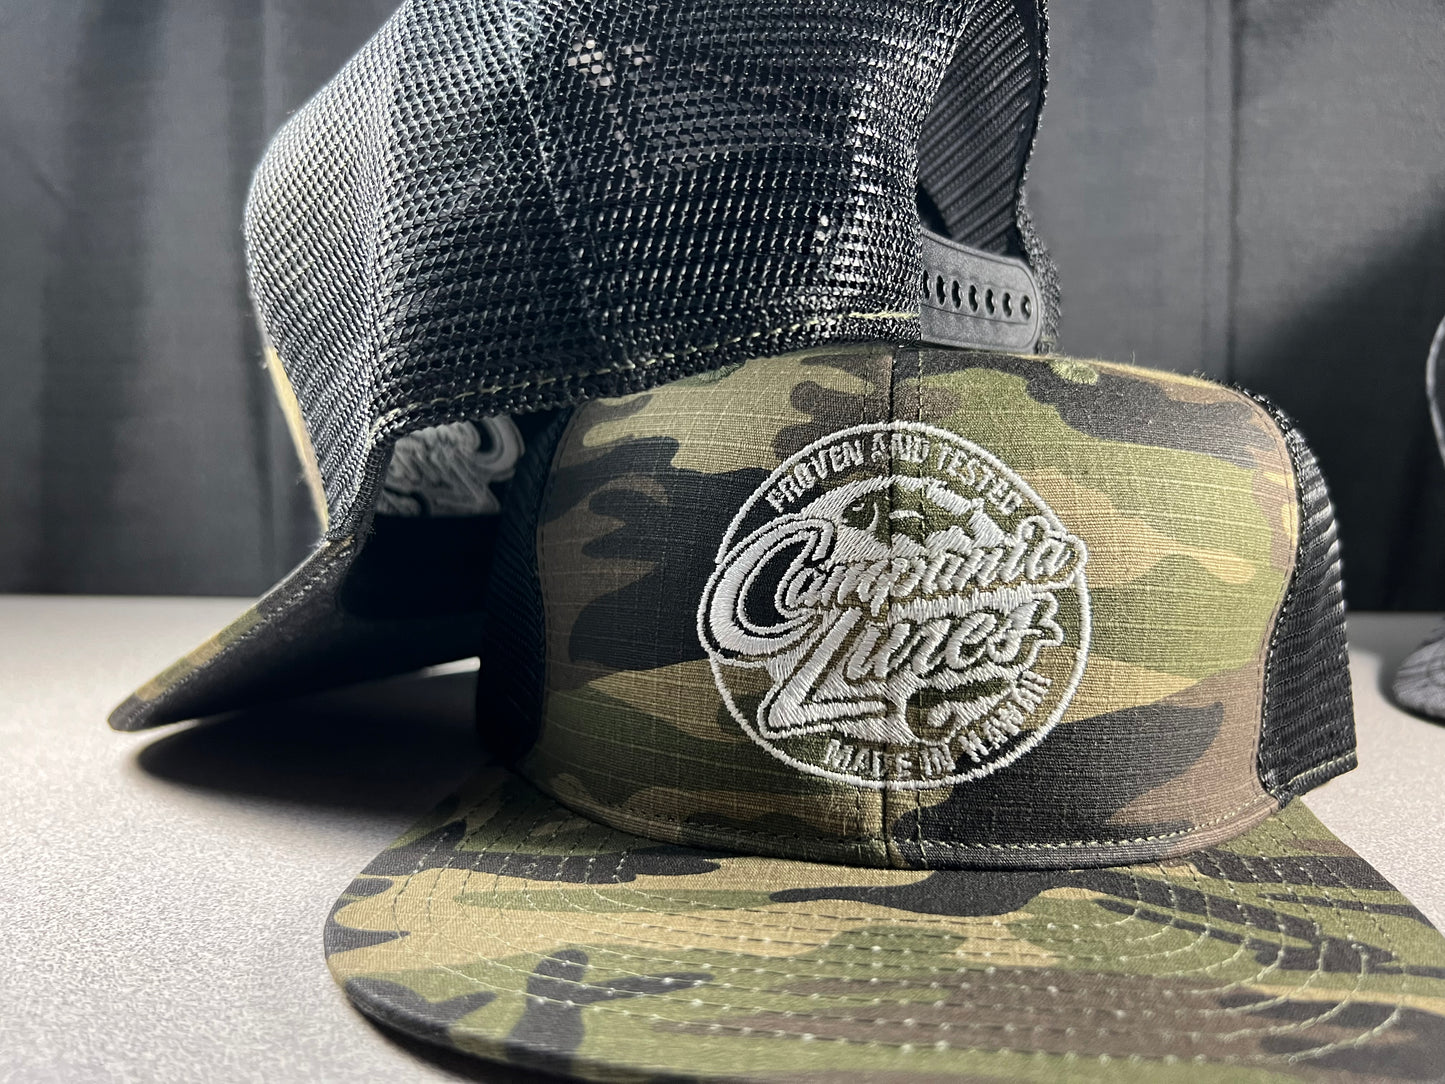 NEW Snapback Hats! Locally printed and designed.